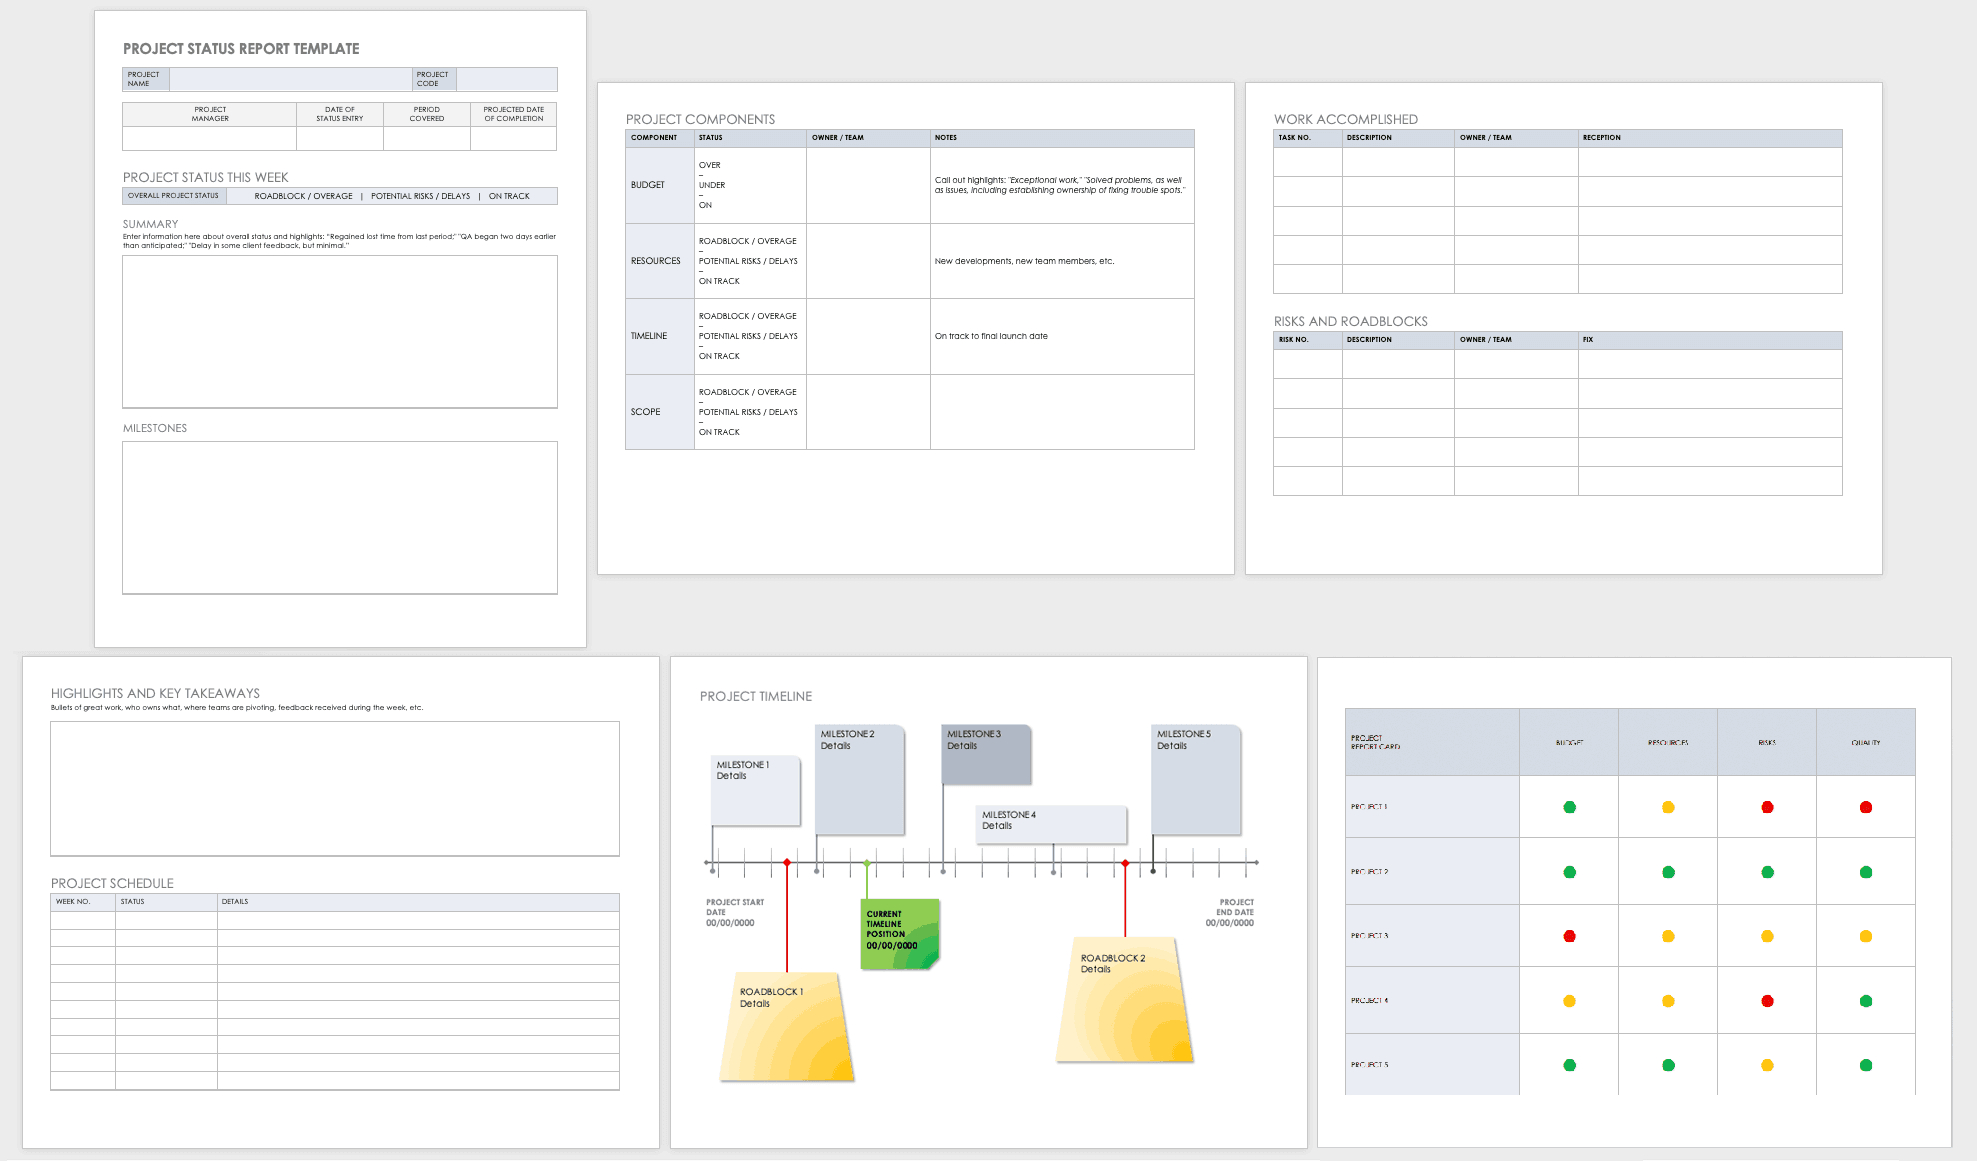 Free Project Report Templates | Smartsheet With Regard To Check Out Report Template